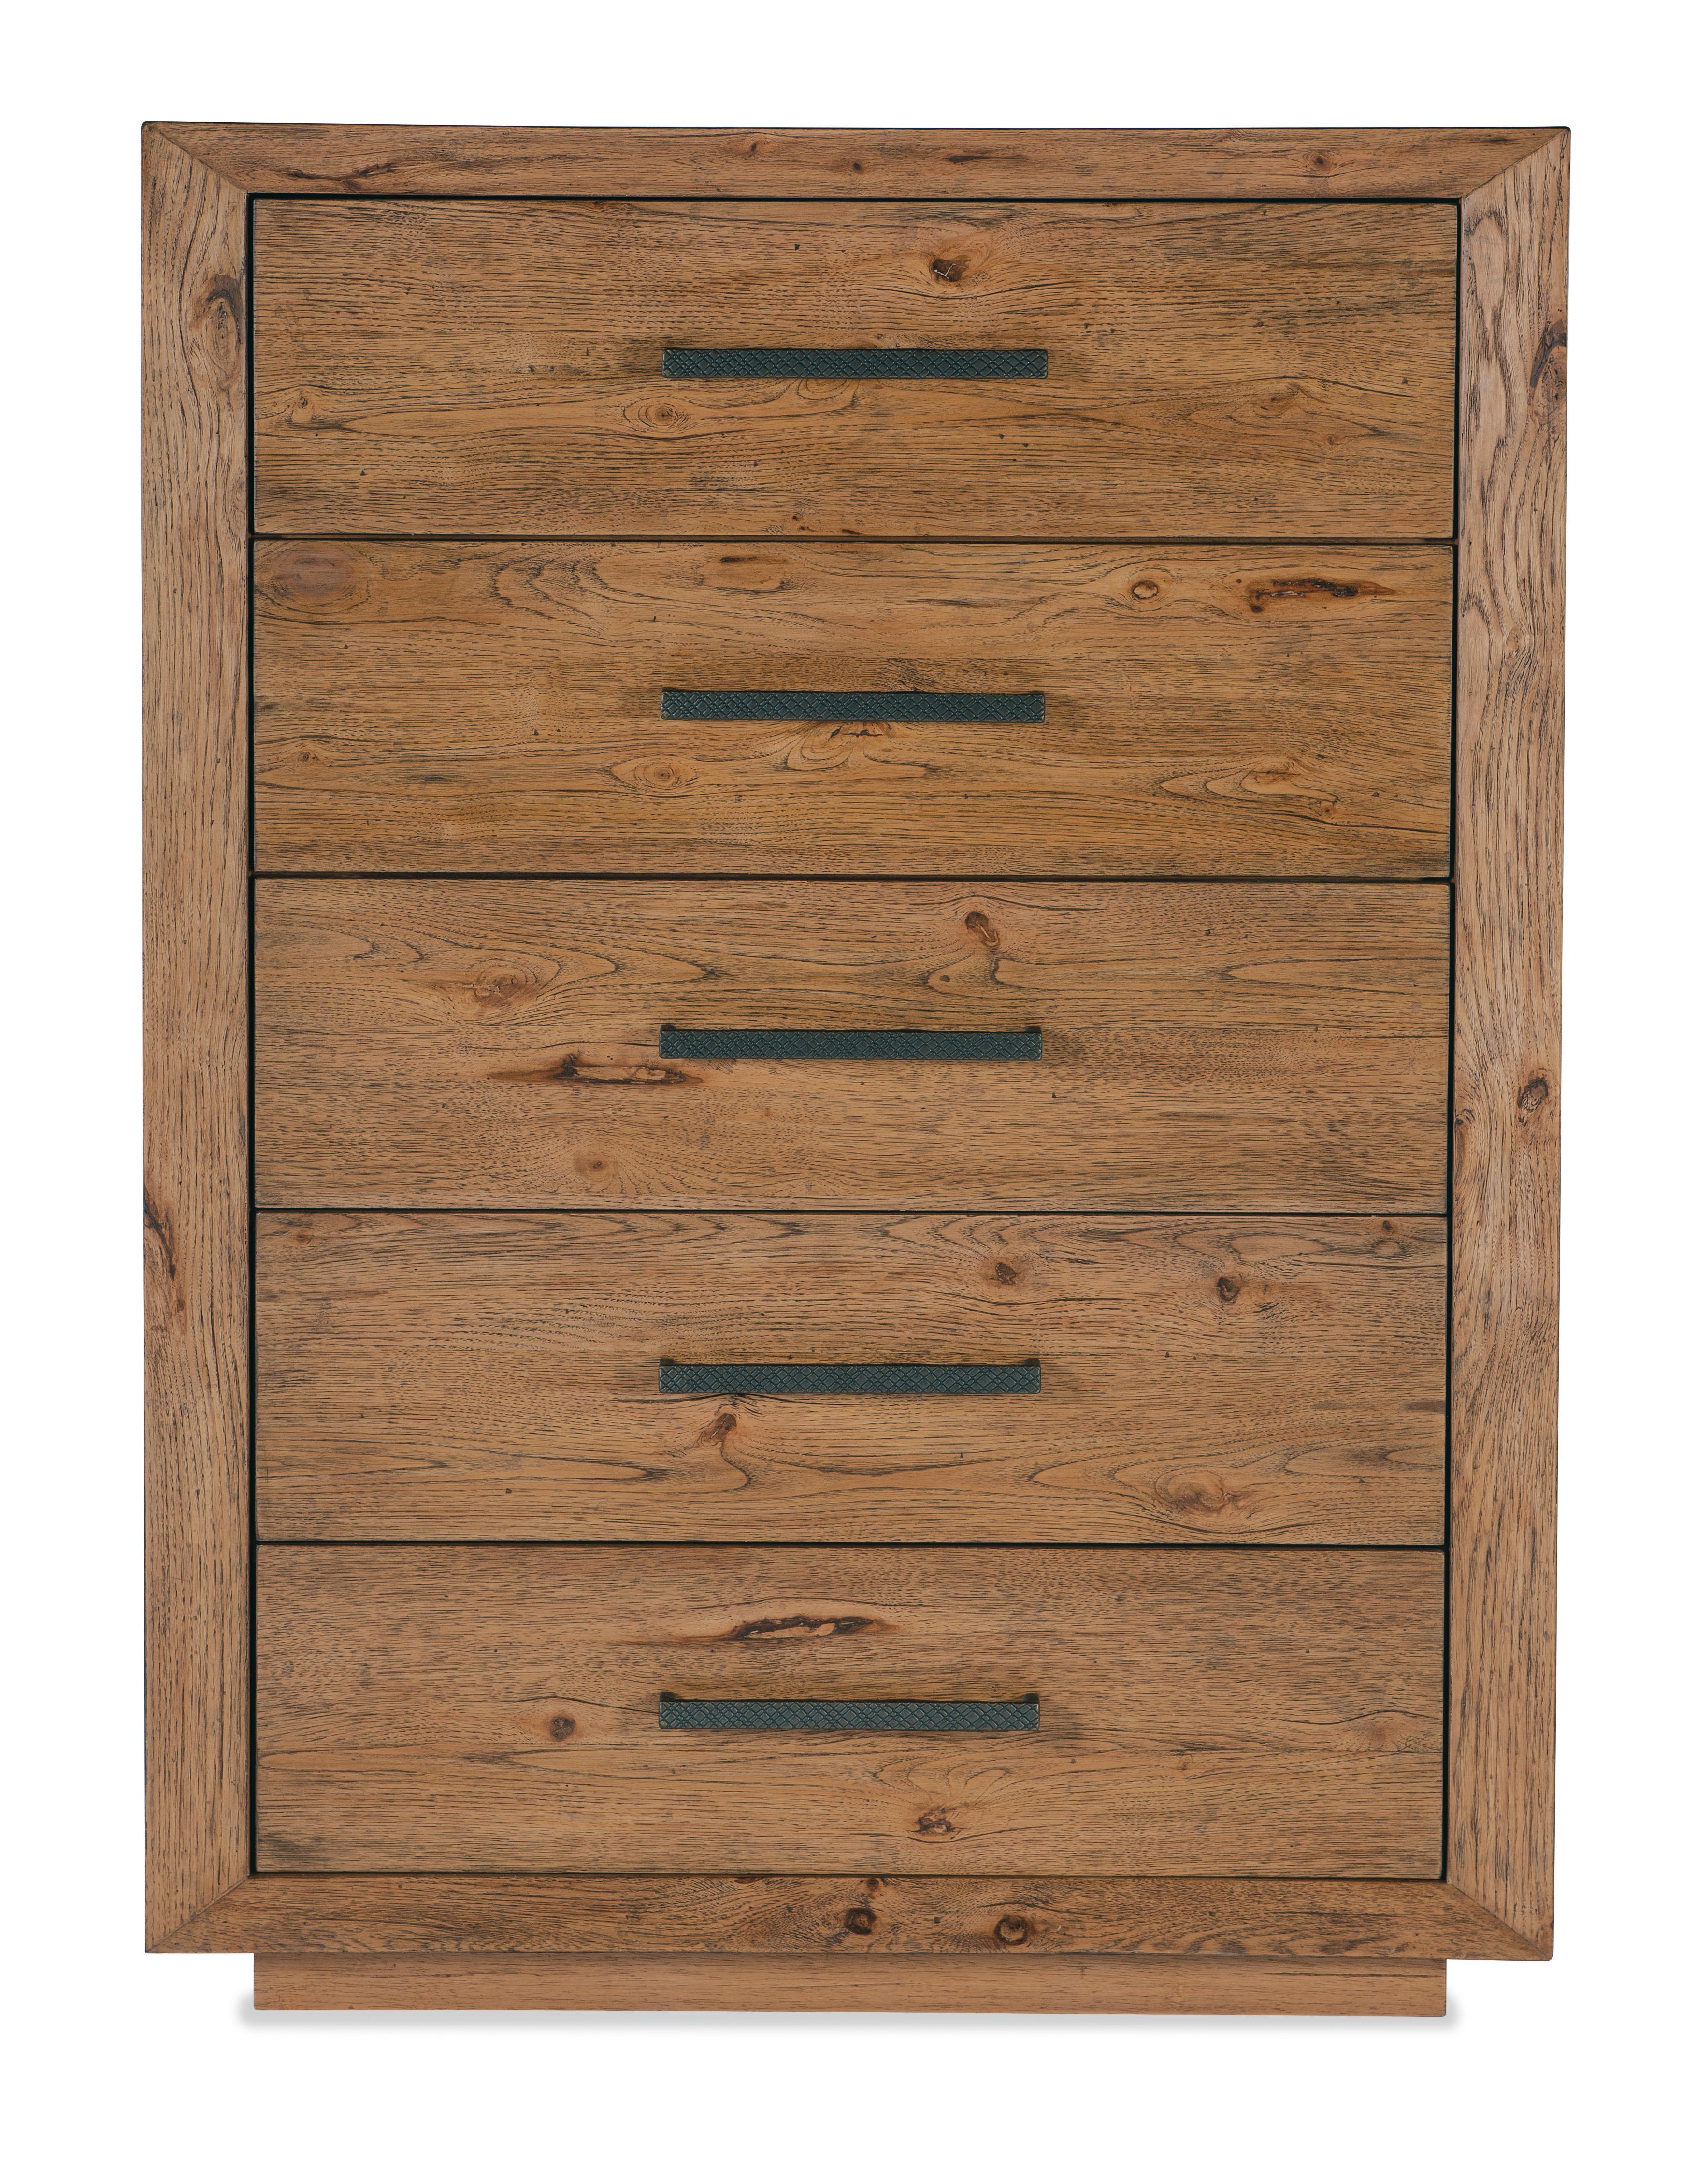 Big Sky Five Drawer Chest - 6700-90010-80